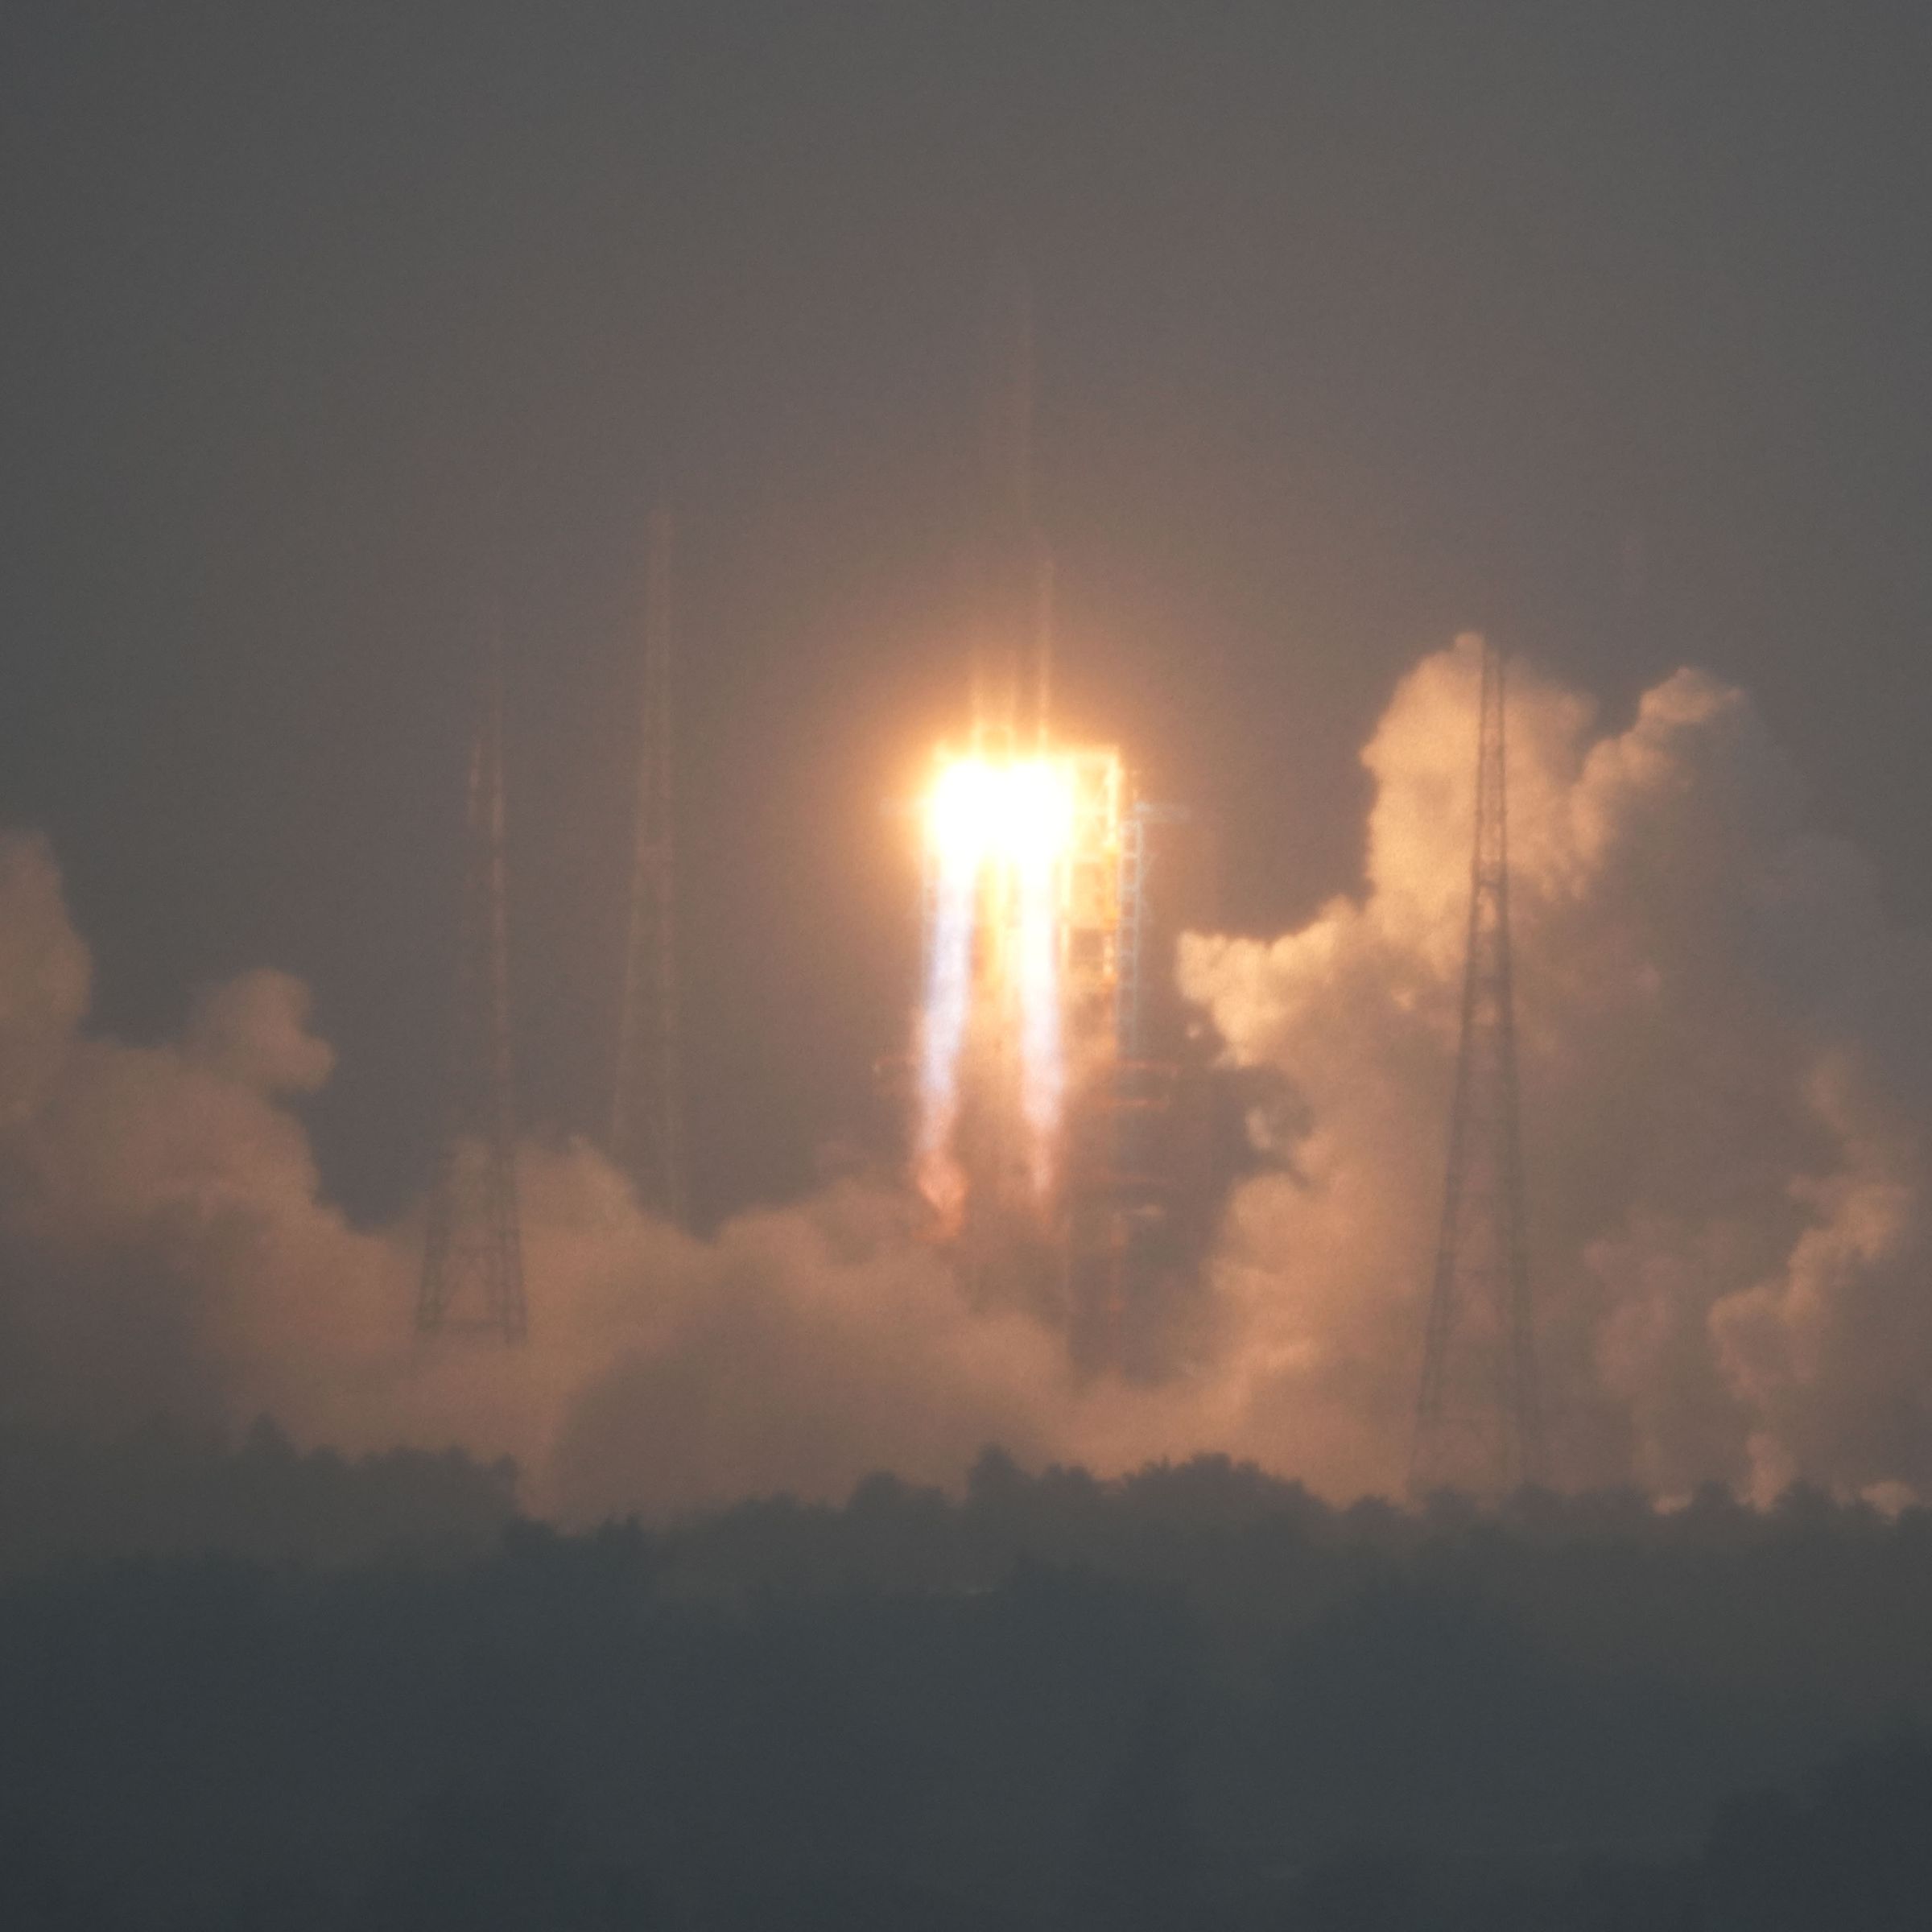 A photo showing the launch of China’s Chang ‘e-6 probe